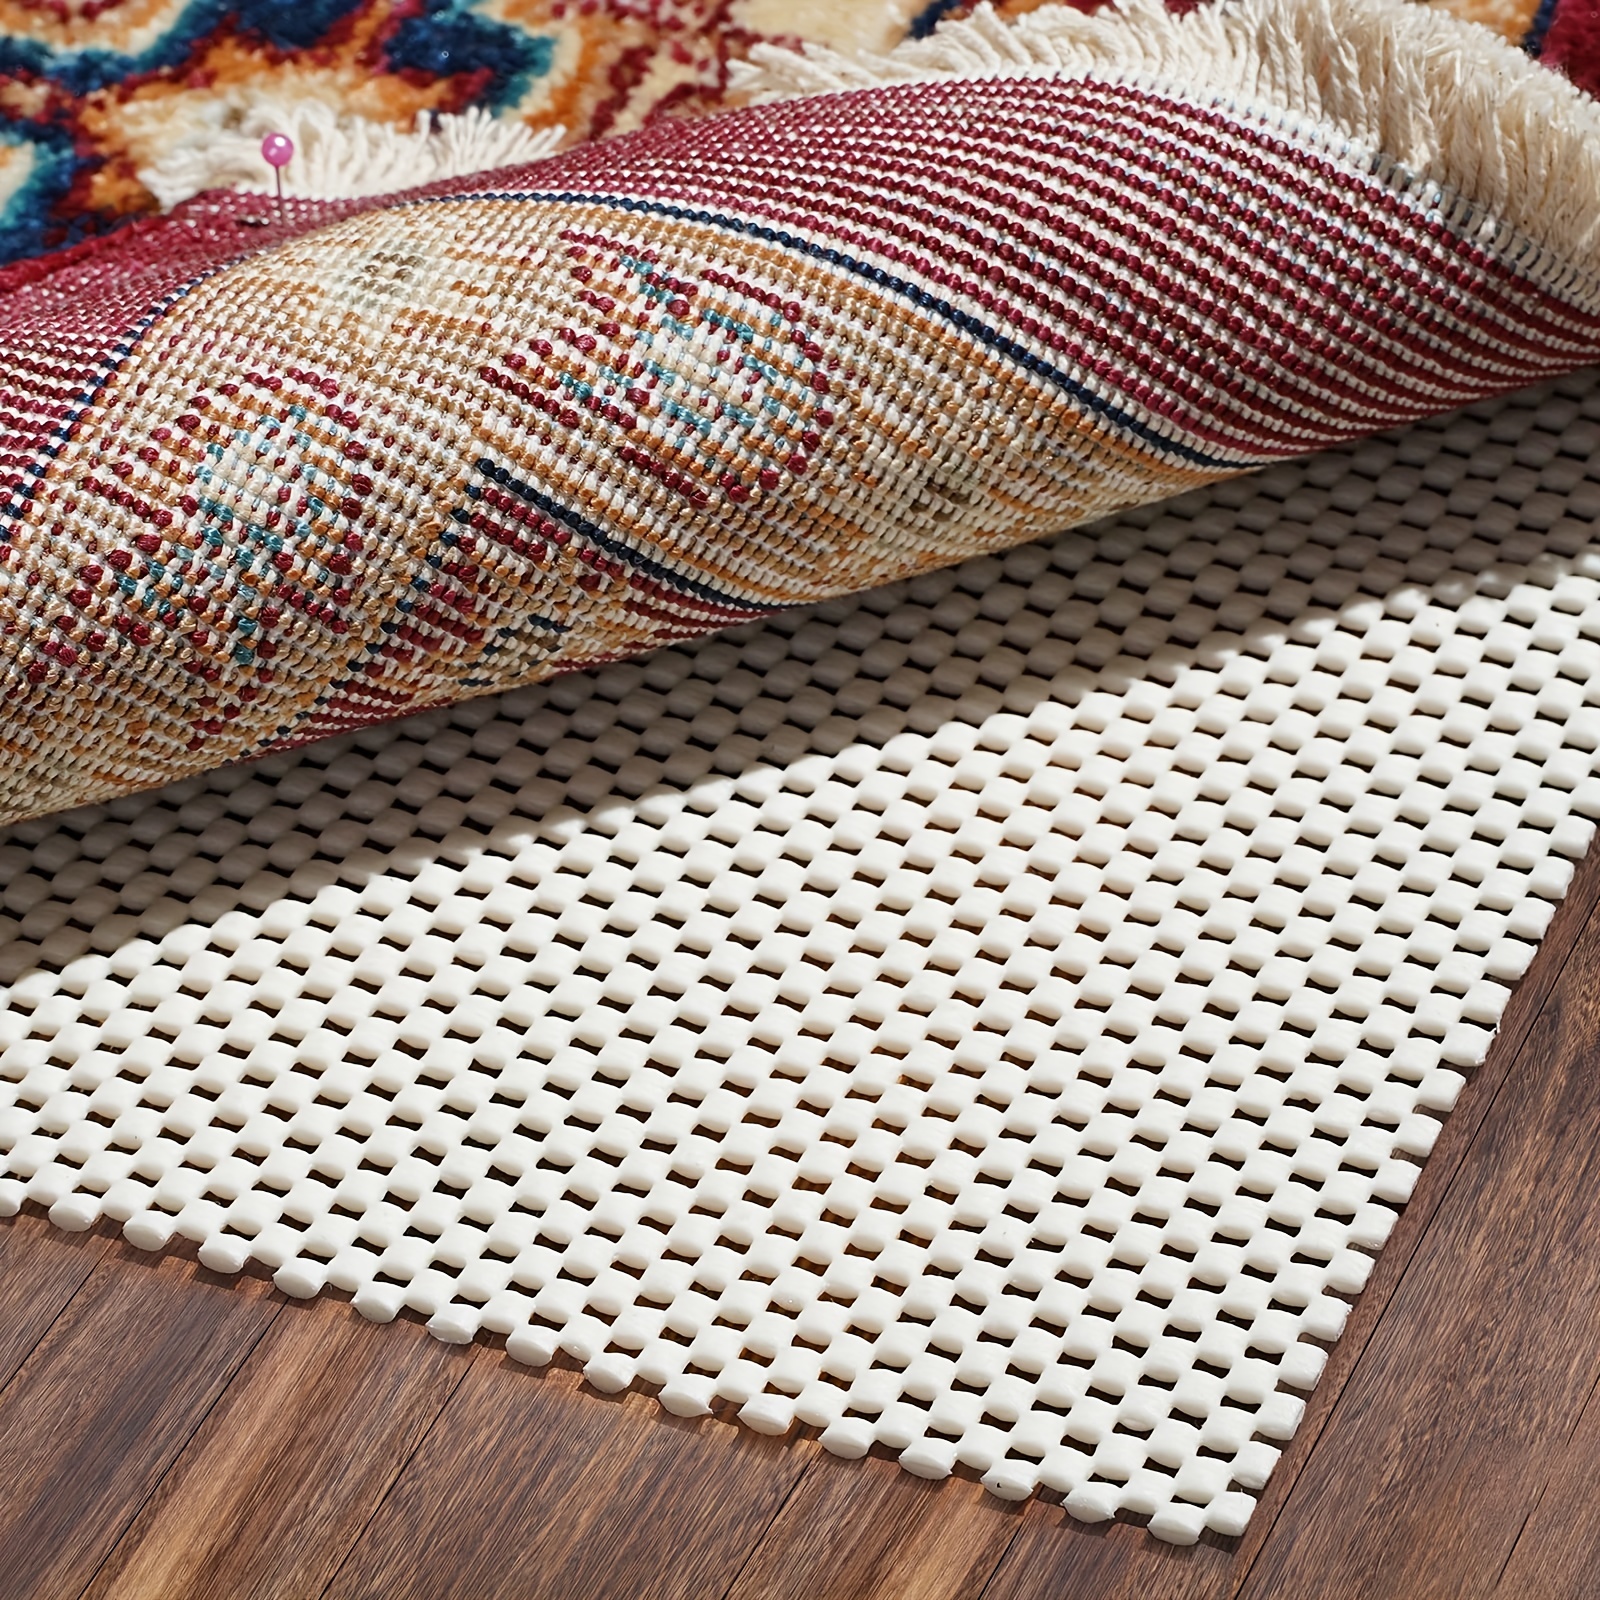 Rug Gripper Non Slip Rug Pad Underlay Liner for Hardwood Floors Supper Grip  Thick Padding Adds Cushion Prevents Sliding Size 5 X 7